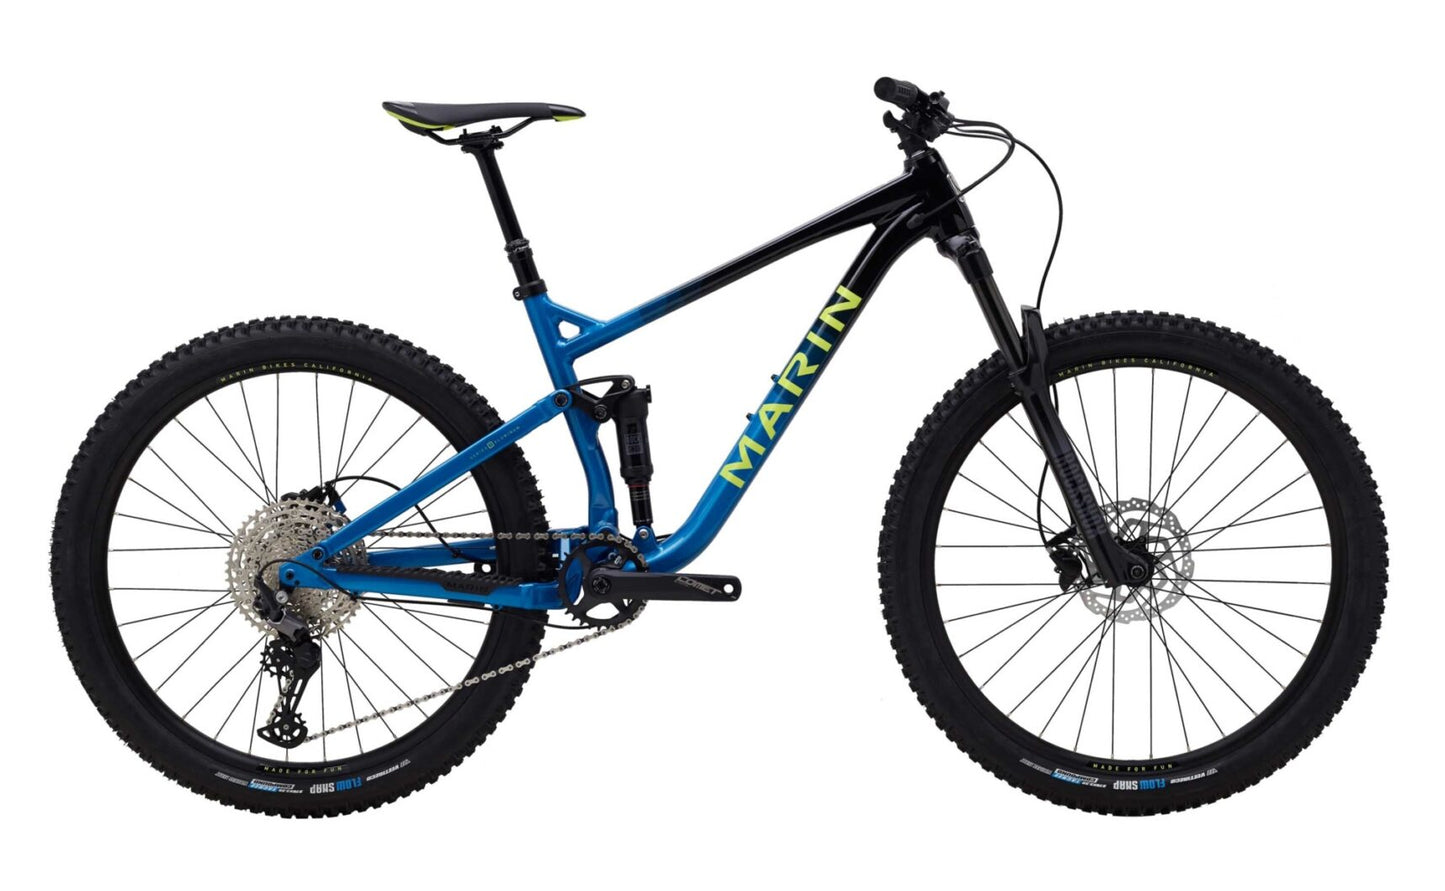 Full Suspension Rift Zone 2 by Marin Price 29" wheels